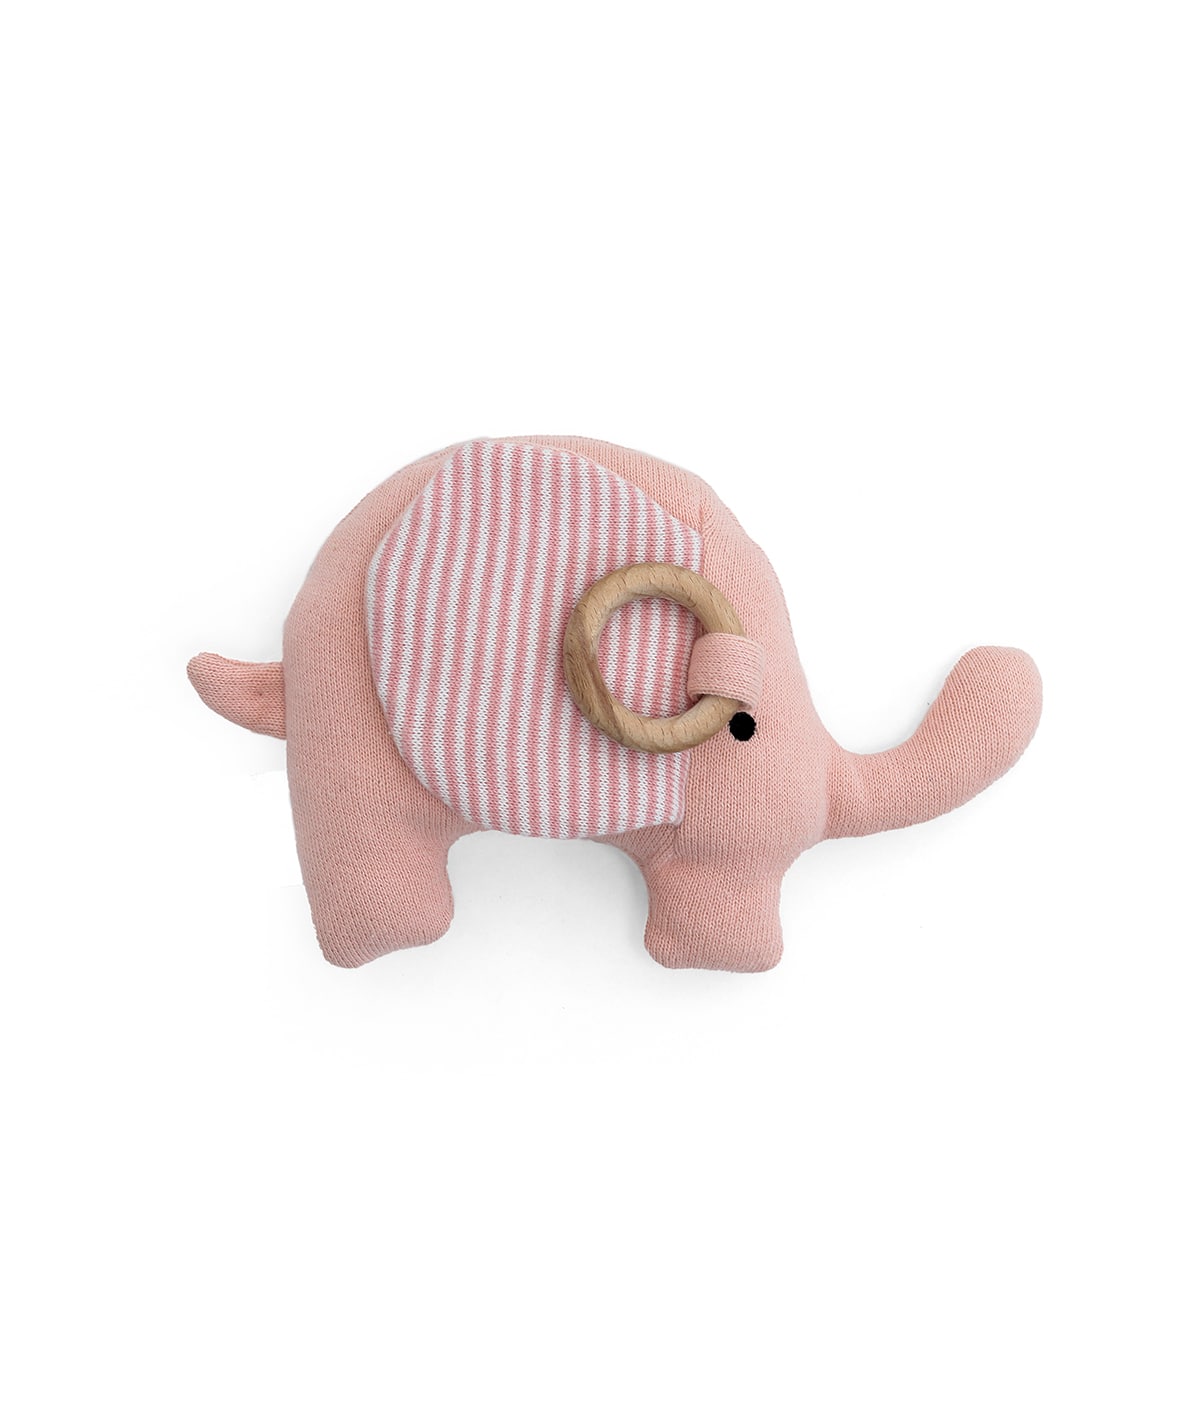 Crinkle Me Elephant Soother Toy Cotton Knitted Stuffed Soft Toy (Baby Pink & Natural)